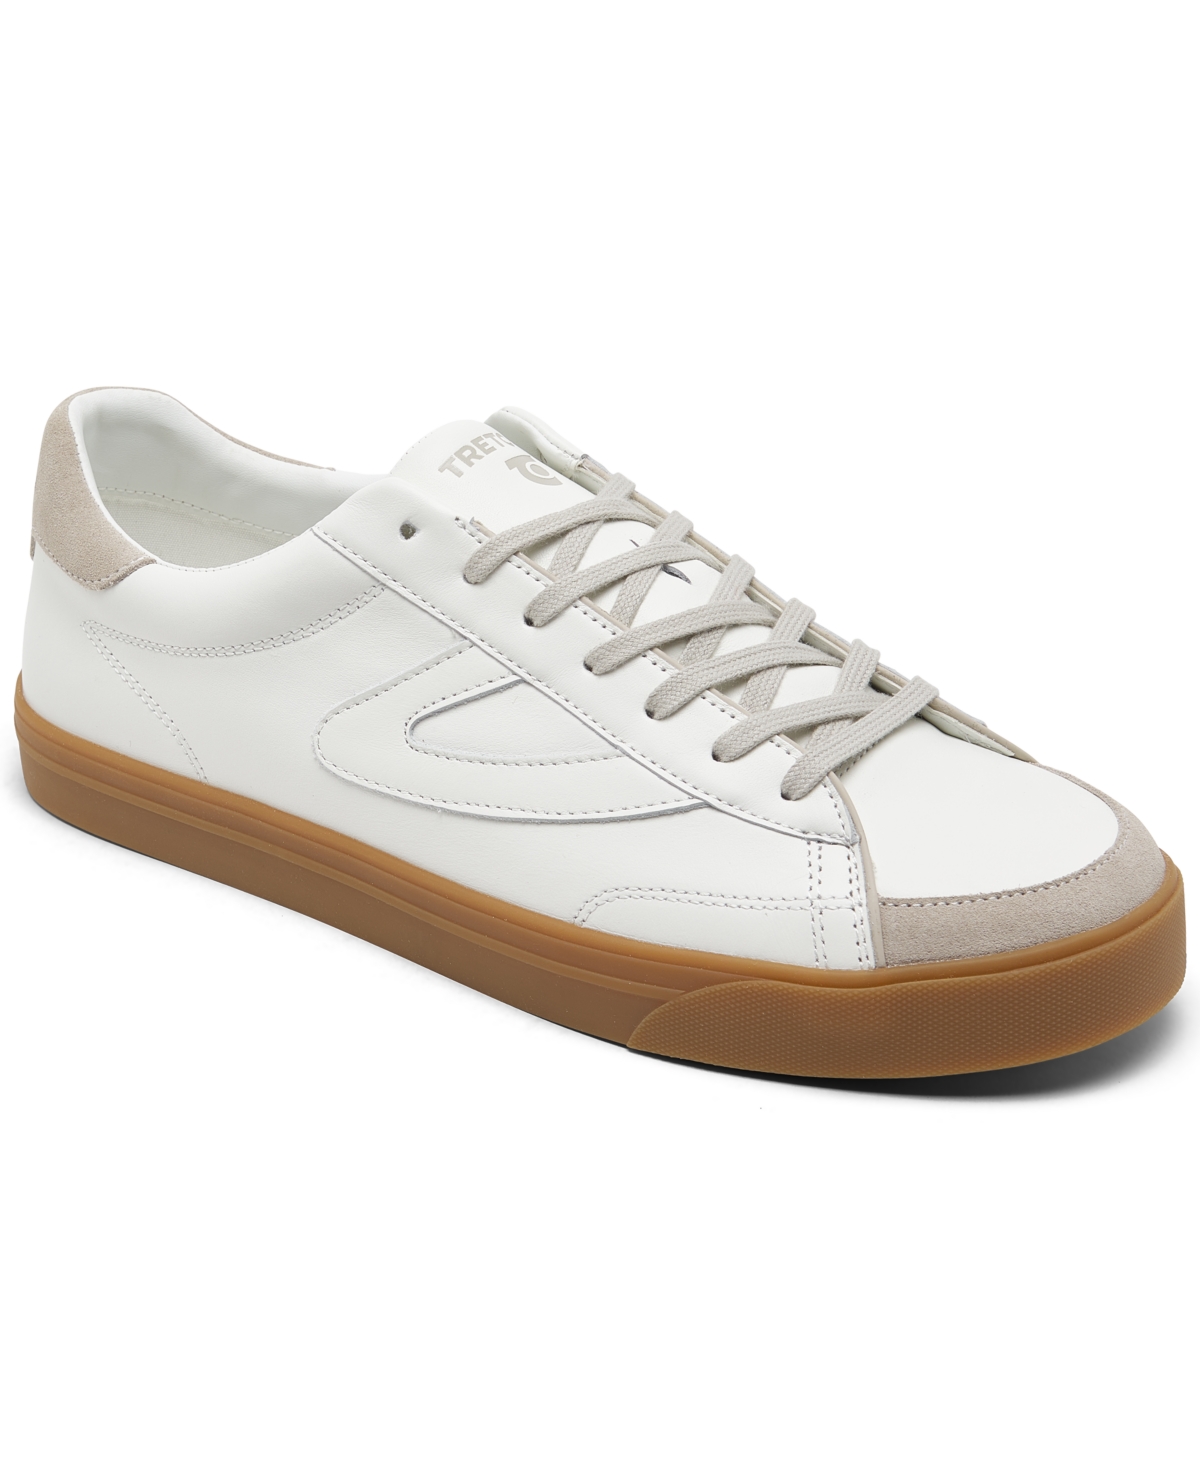 Under Armour Men's Kick Serve Low Court Casual Sneakers From Finish Line In Bright White,gum